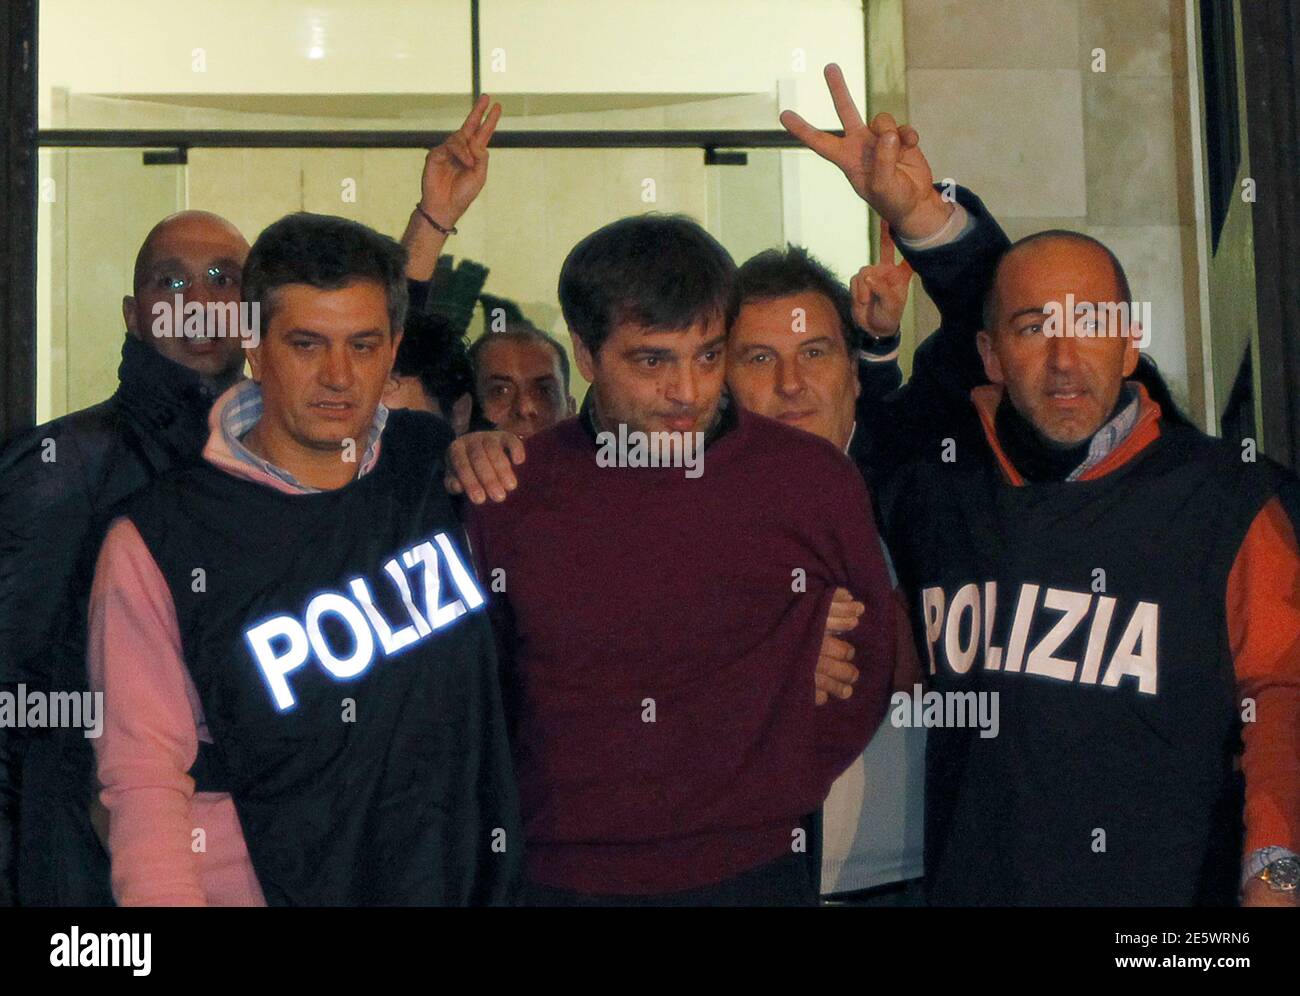 Italian policemen escort Camorra Antonio Iovine (C) as he leaves the police headquarters in Naples November 17, 2010. Italian police arrested on Wednesday a mafia boss who been on the